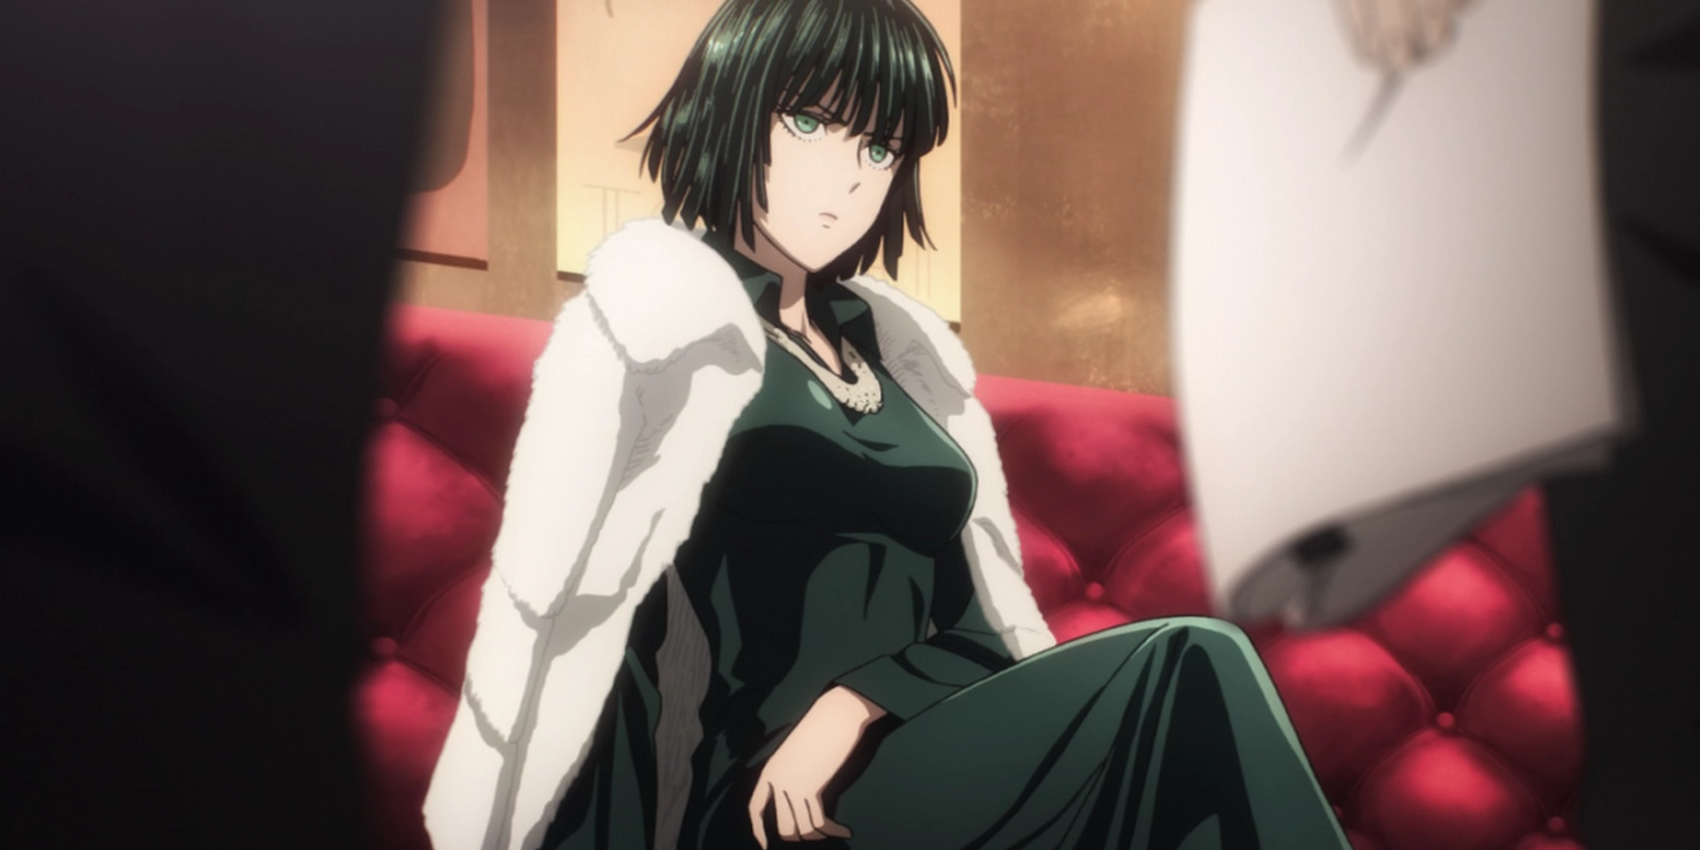 Fubuki sitting on the couch in One Punch Man